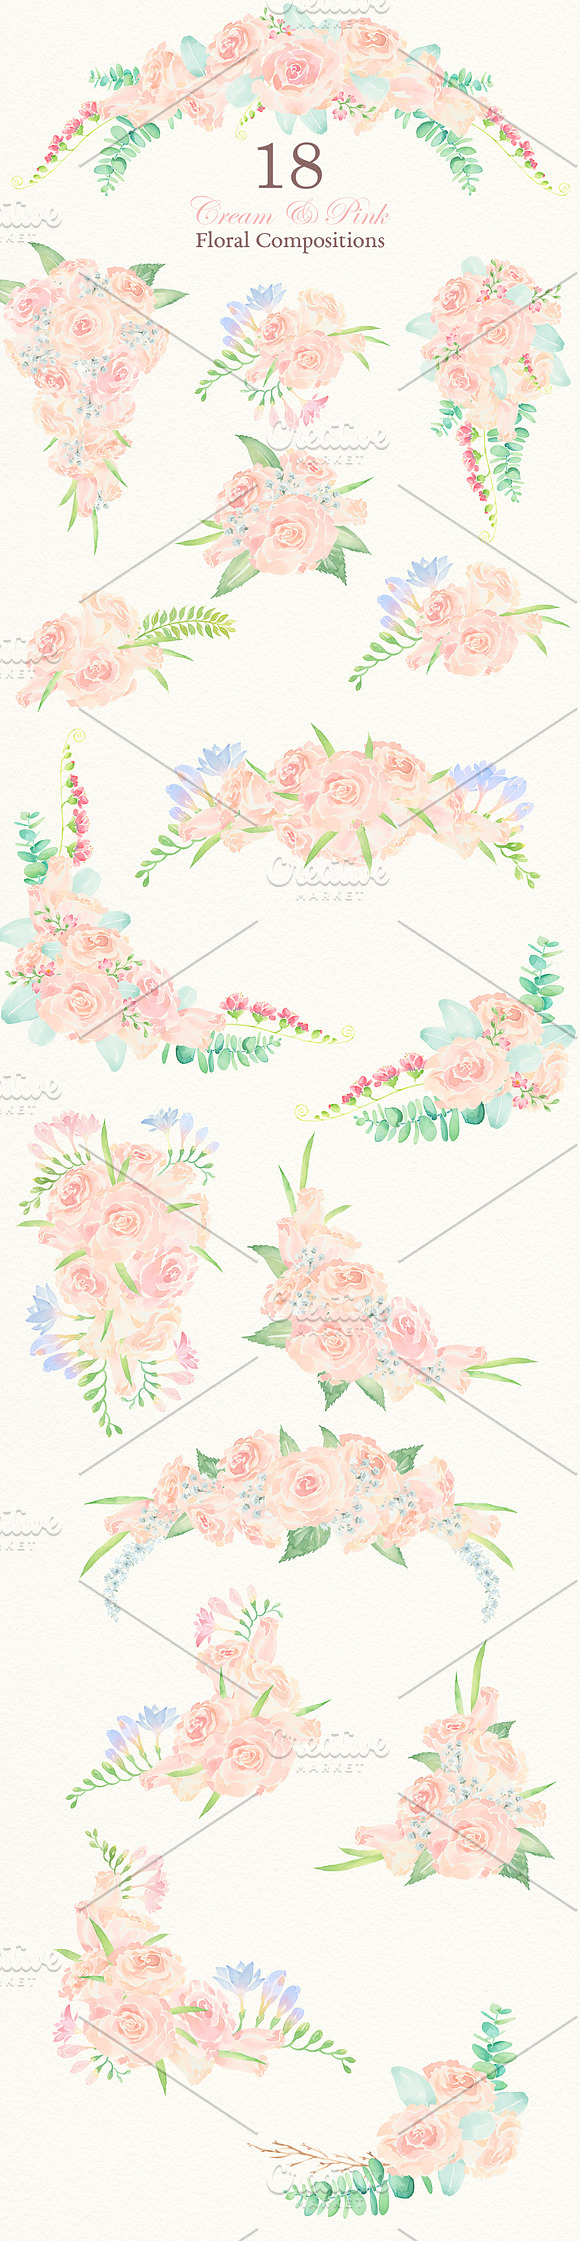 Watercolor Wedding Floral Ornaments in Illustrations - product preview 3